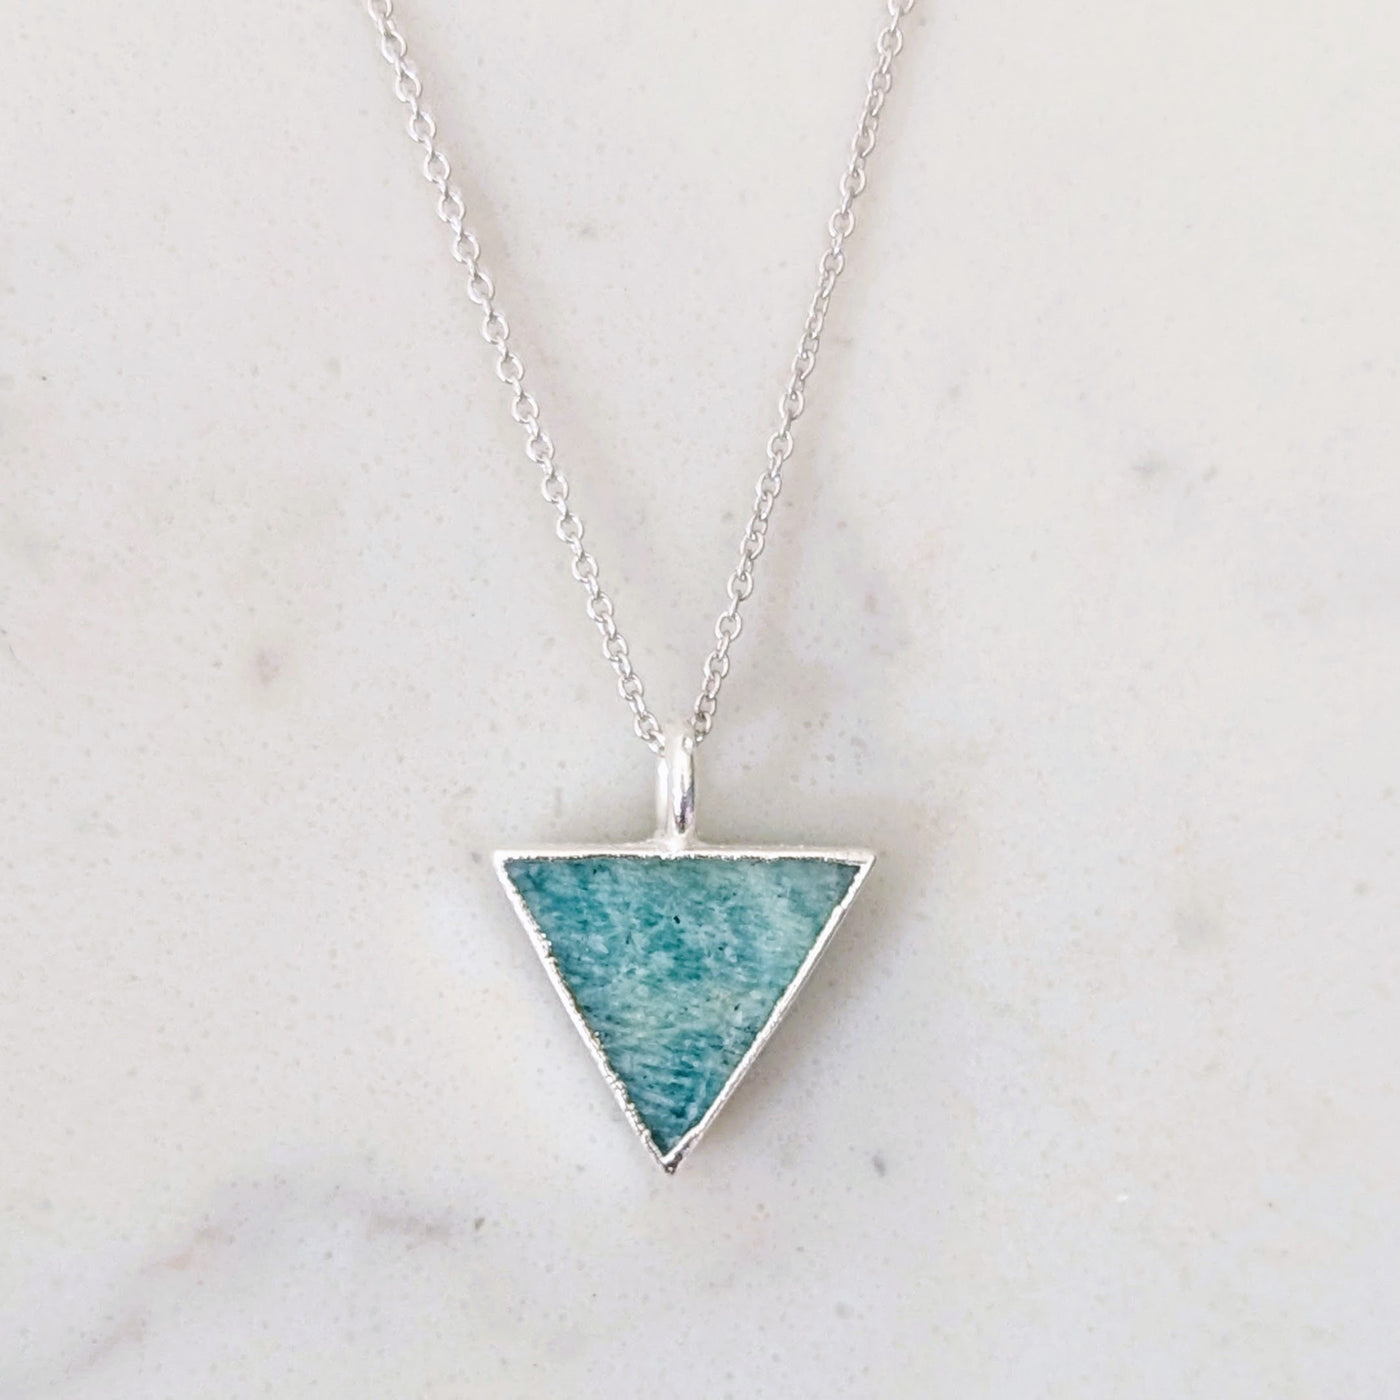 sterling silver amazonite triangular charm pendant necklace